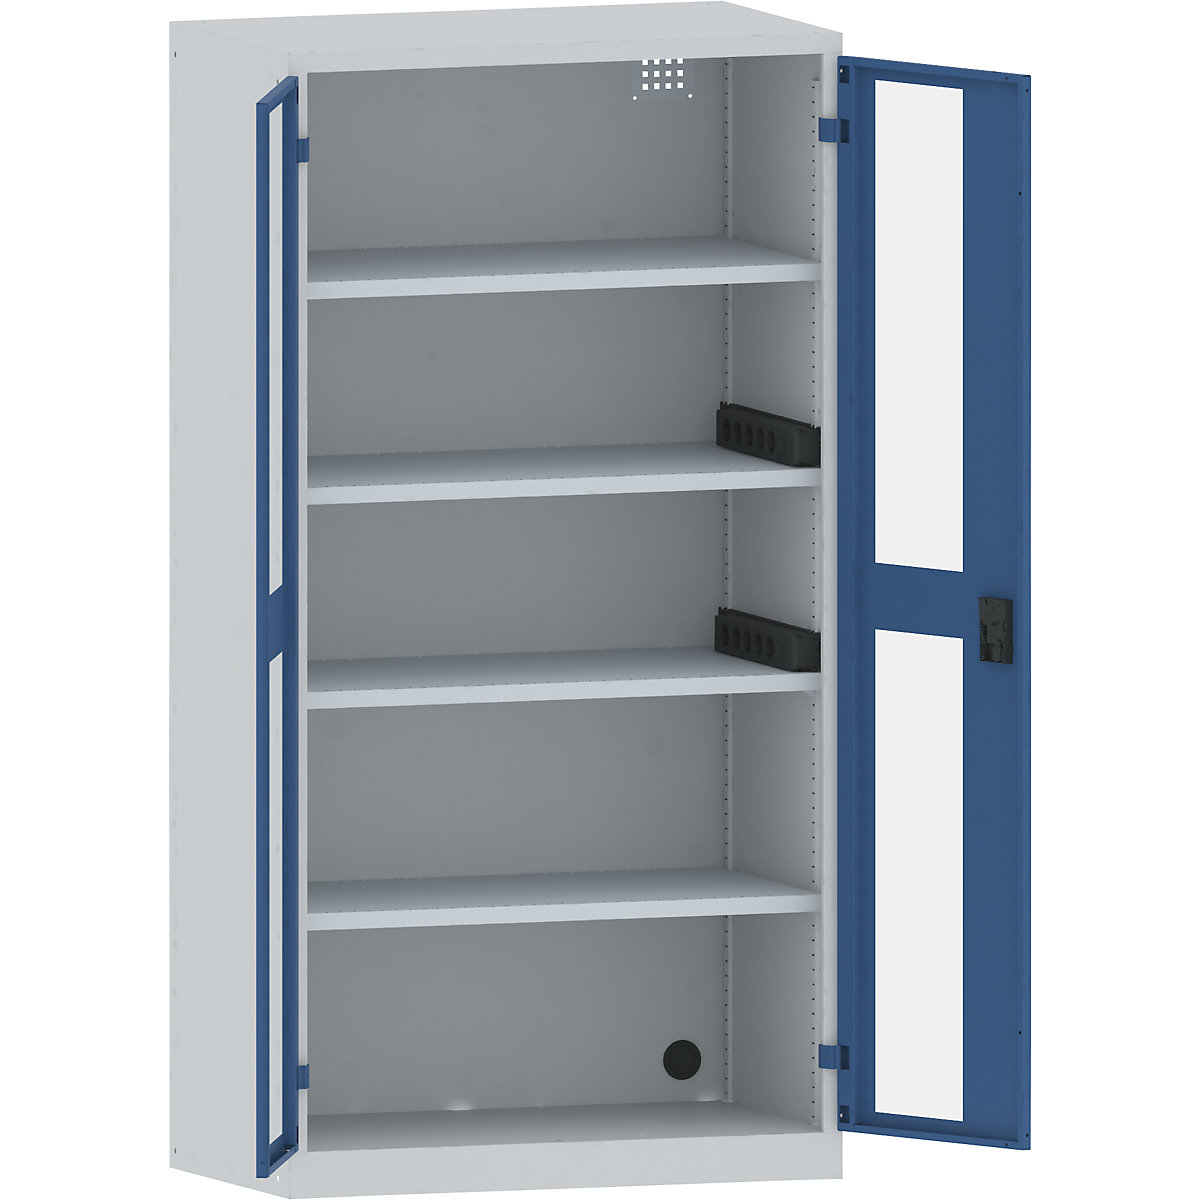 Battery charging cabinet – LISTA, 4 shelves, vision panel doors, 2 power strips at side, grey / blue-10